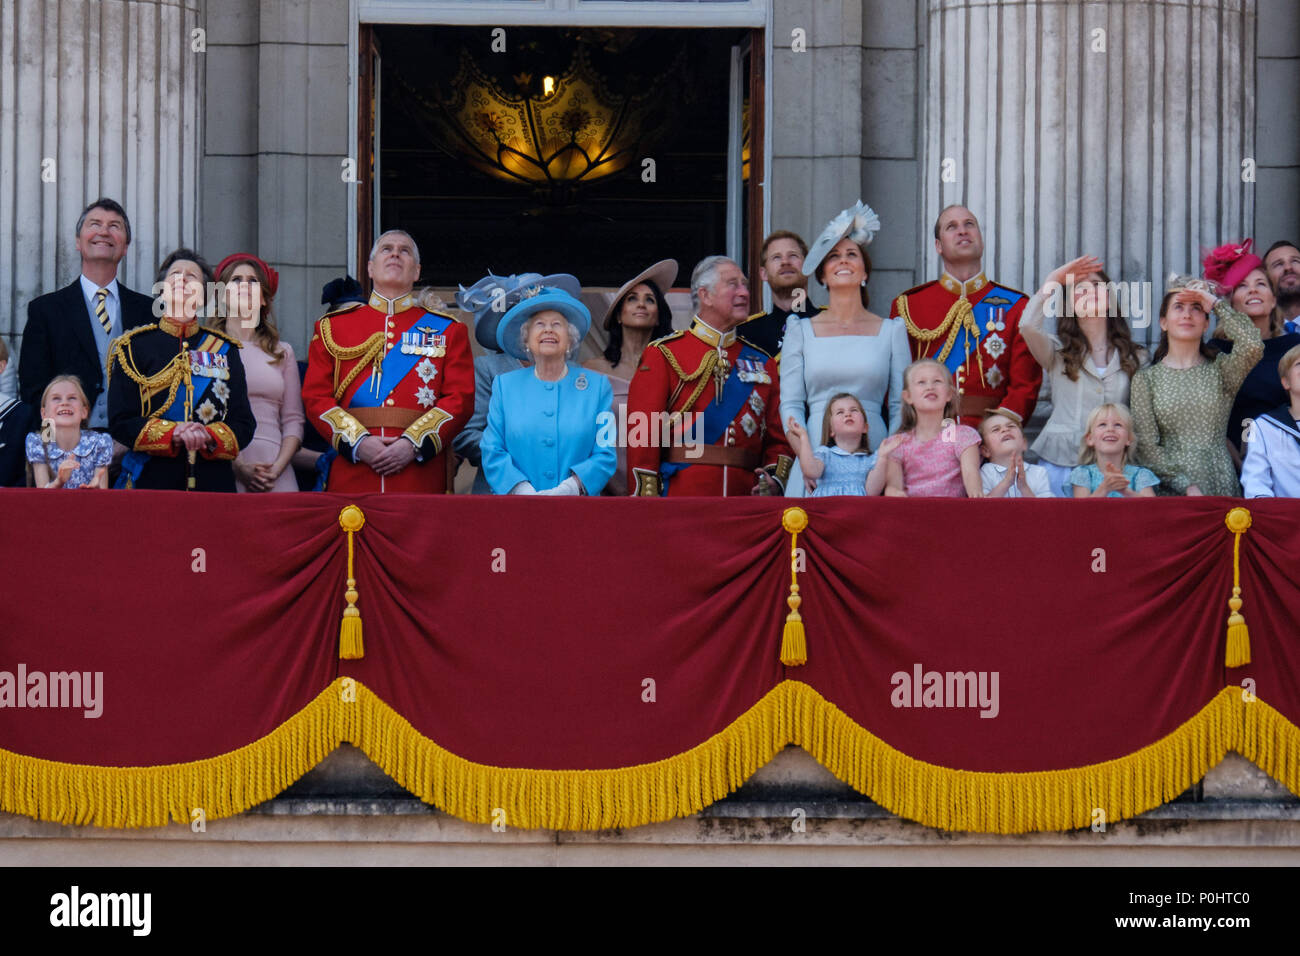 London, UK, 9 June 2018. The Royal Family gather on the palace balcony  at Trooping the Colour and Queens Birthday Parade on Saturday 9 June 2018 in Buckingham Palace , London. Pictured: Anne, The Princess Royal, Prince Andrew, The Duke of York, HRH Queen Elizabeth II, Prince Charles, Prince of Wales, Meghan Markle, Duchess of Sussex, Prince Harry, The Duke of Sussex, Kate, Duchess of Cambridge, Prince William, Duke of Cambridge, Princess Charlotte of Cambridge , Prince George of Cambridge. Picture by Julie Edwards. Credit: Julie Edwards/Alamy Live News Stock Photo